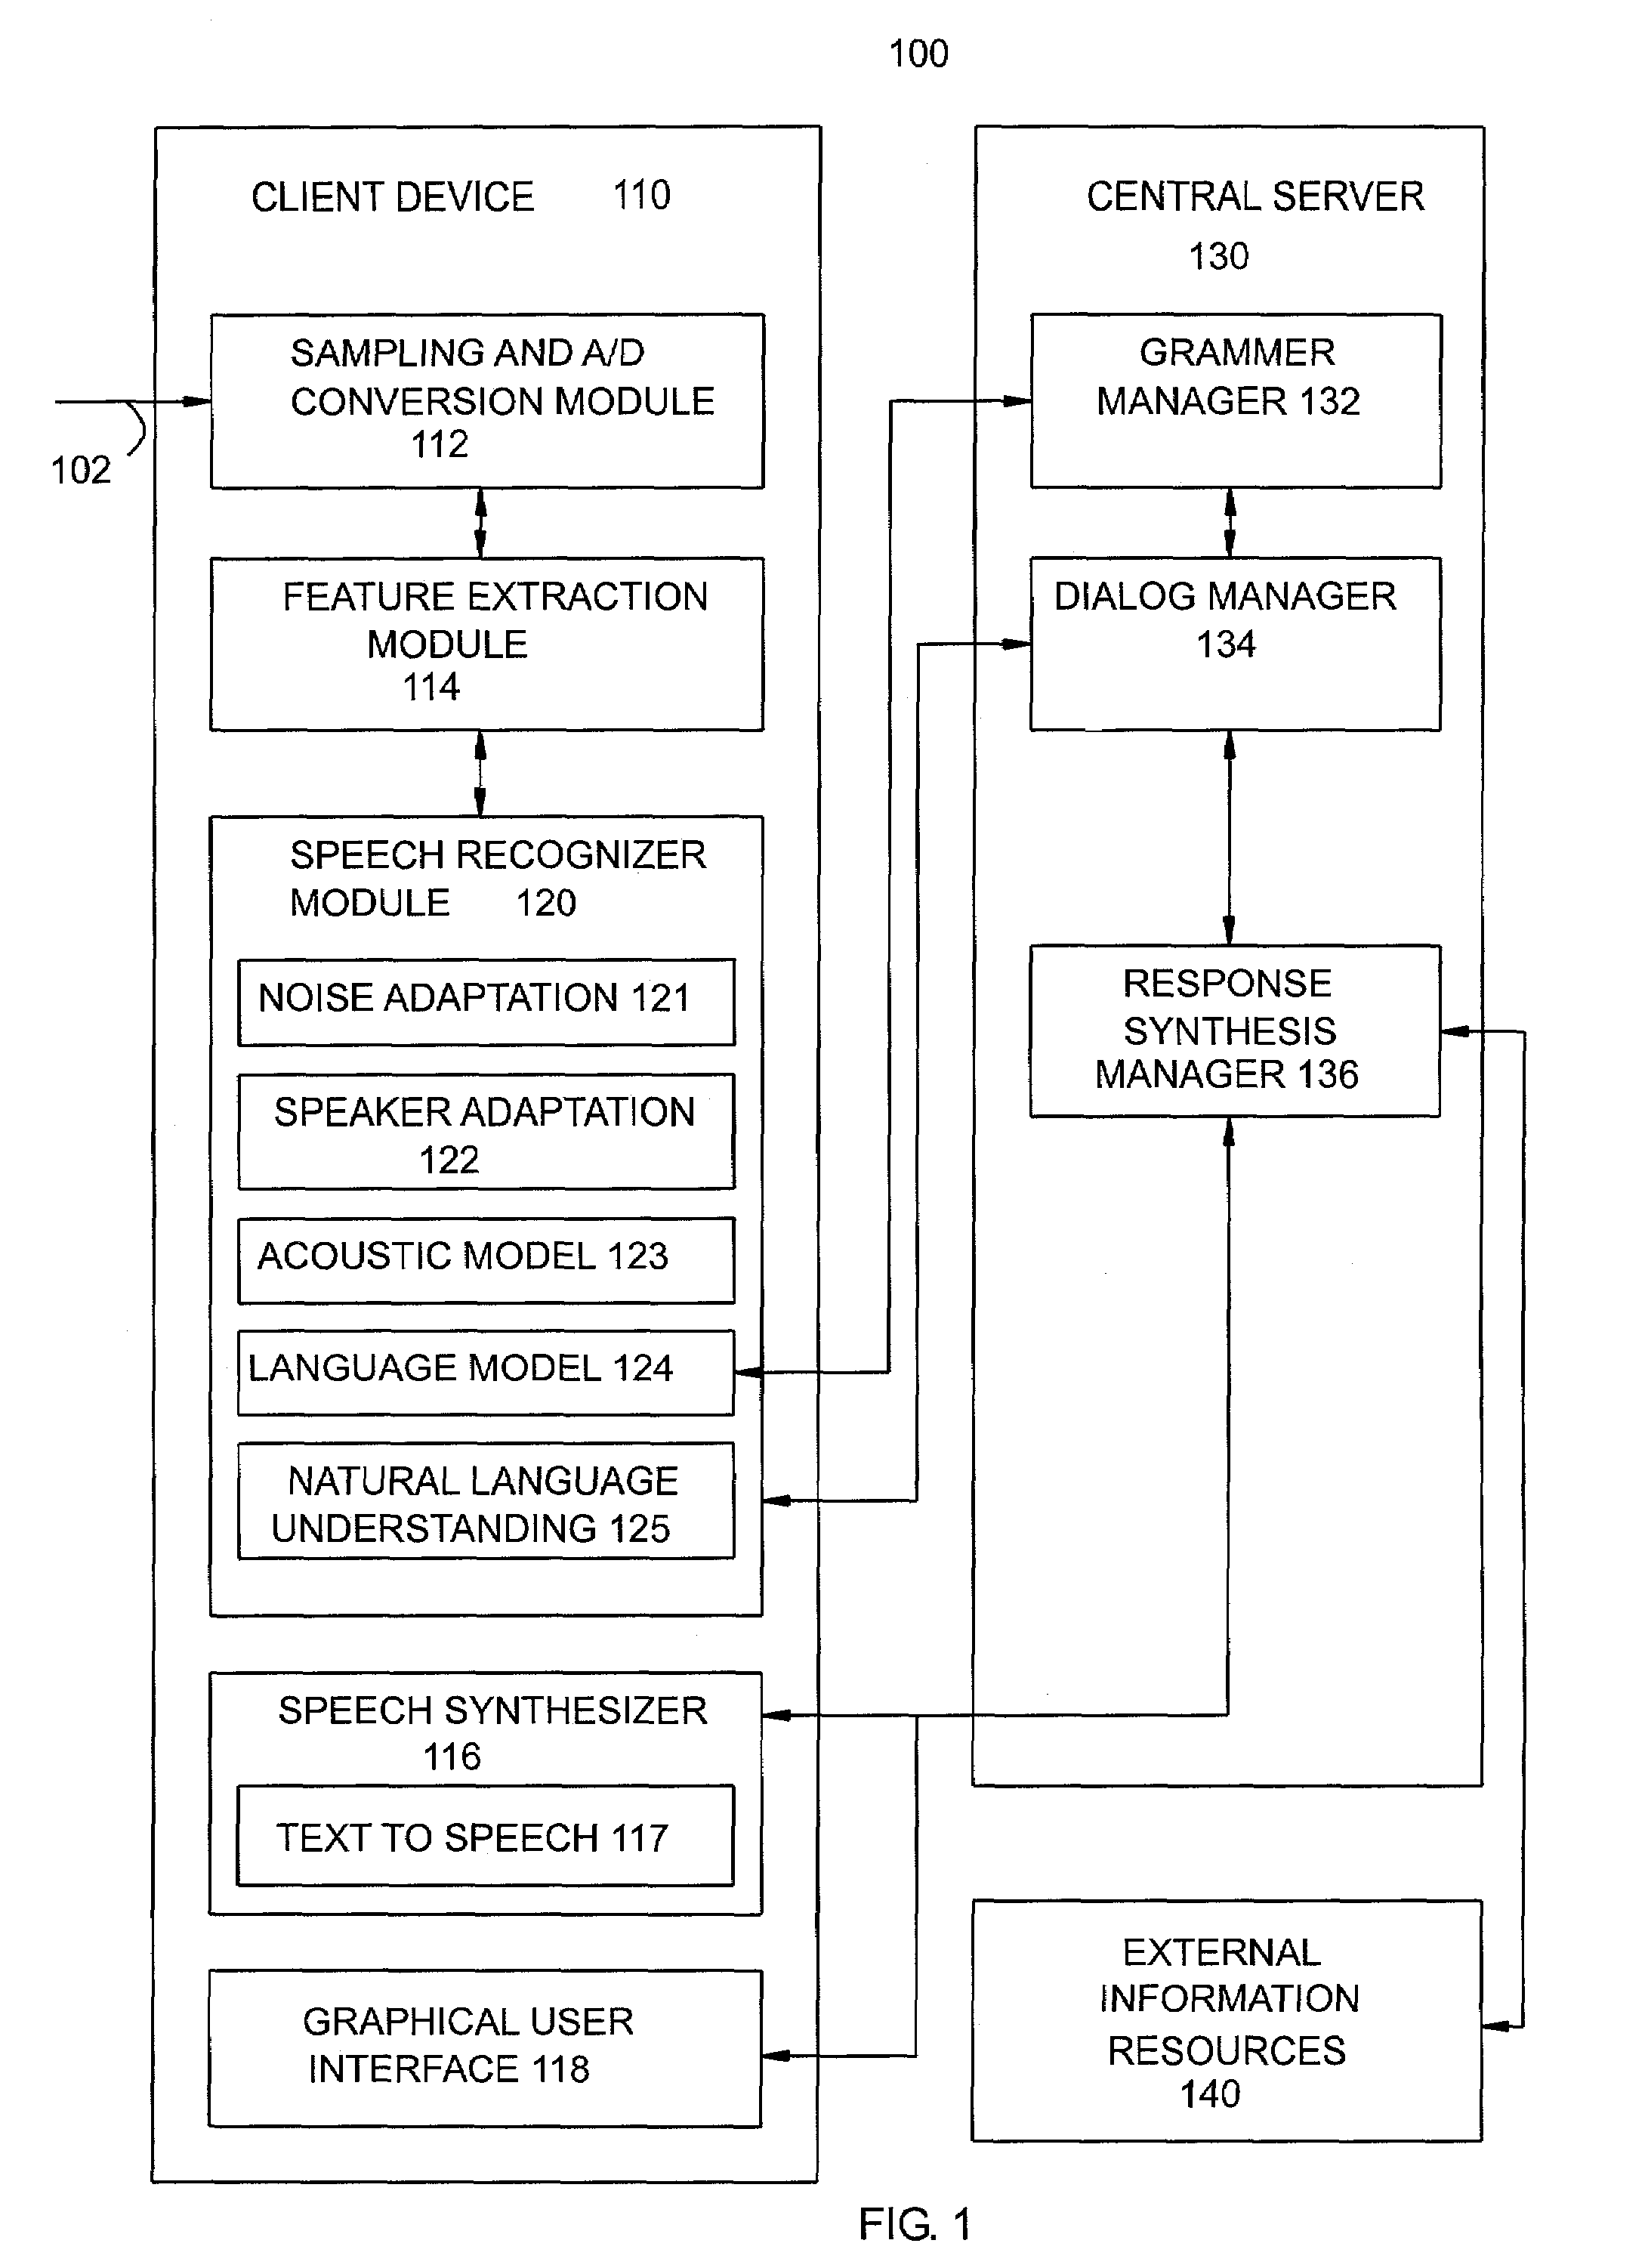 Method and apparatus for providing speech-driven routing between spoken language applications